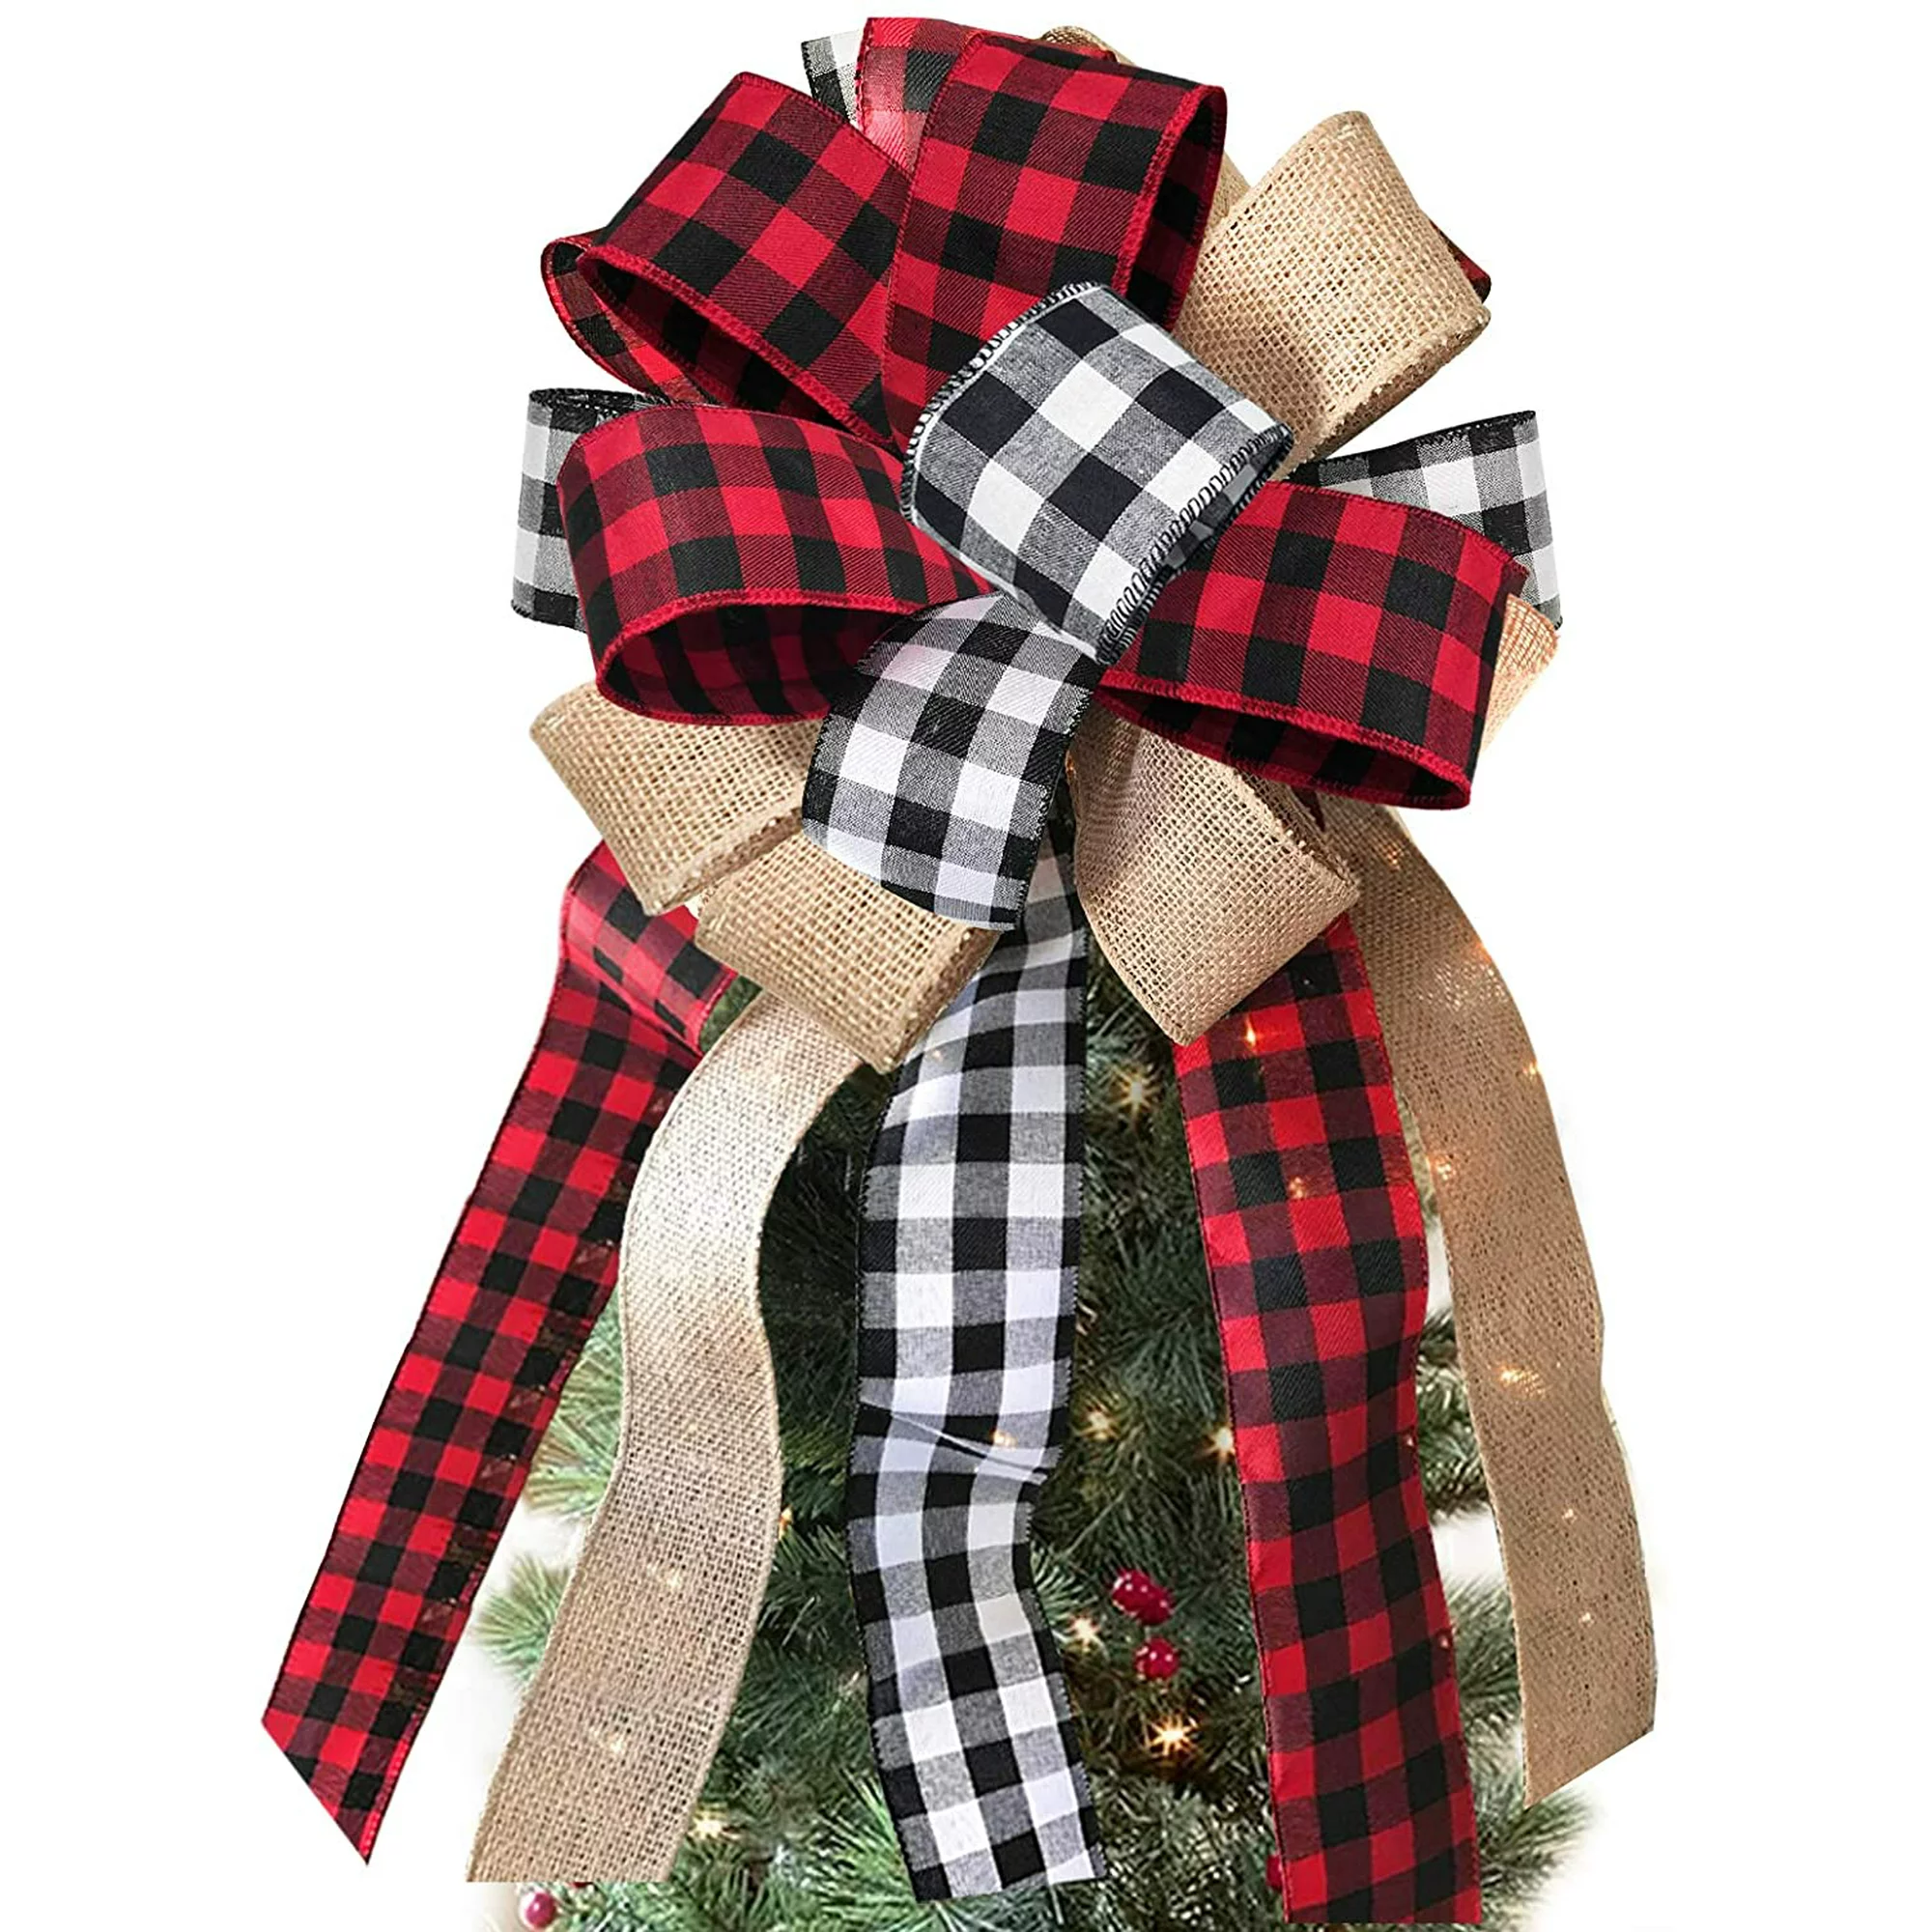 Large Reusable Present Topper